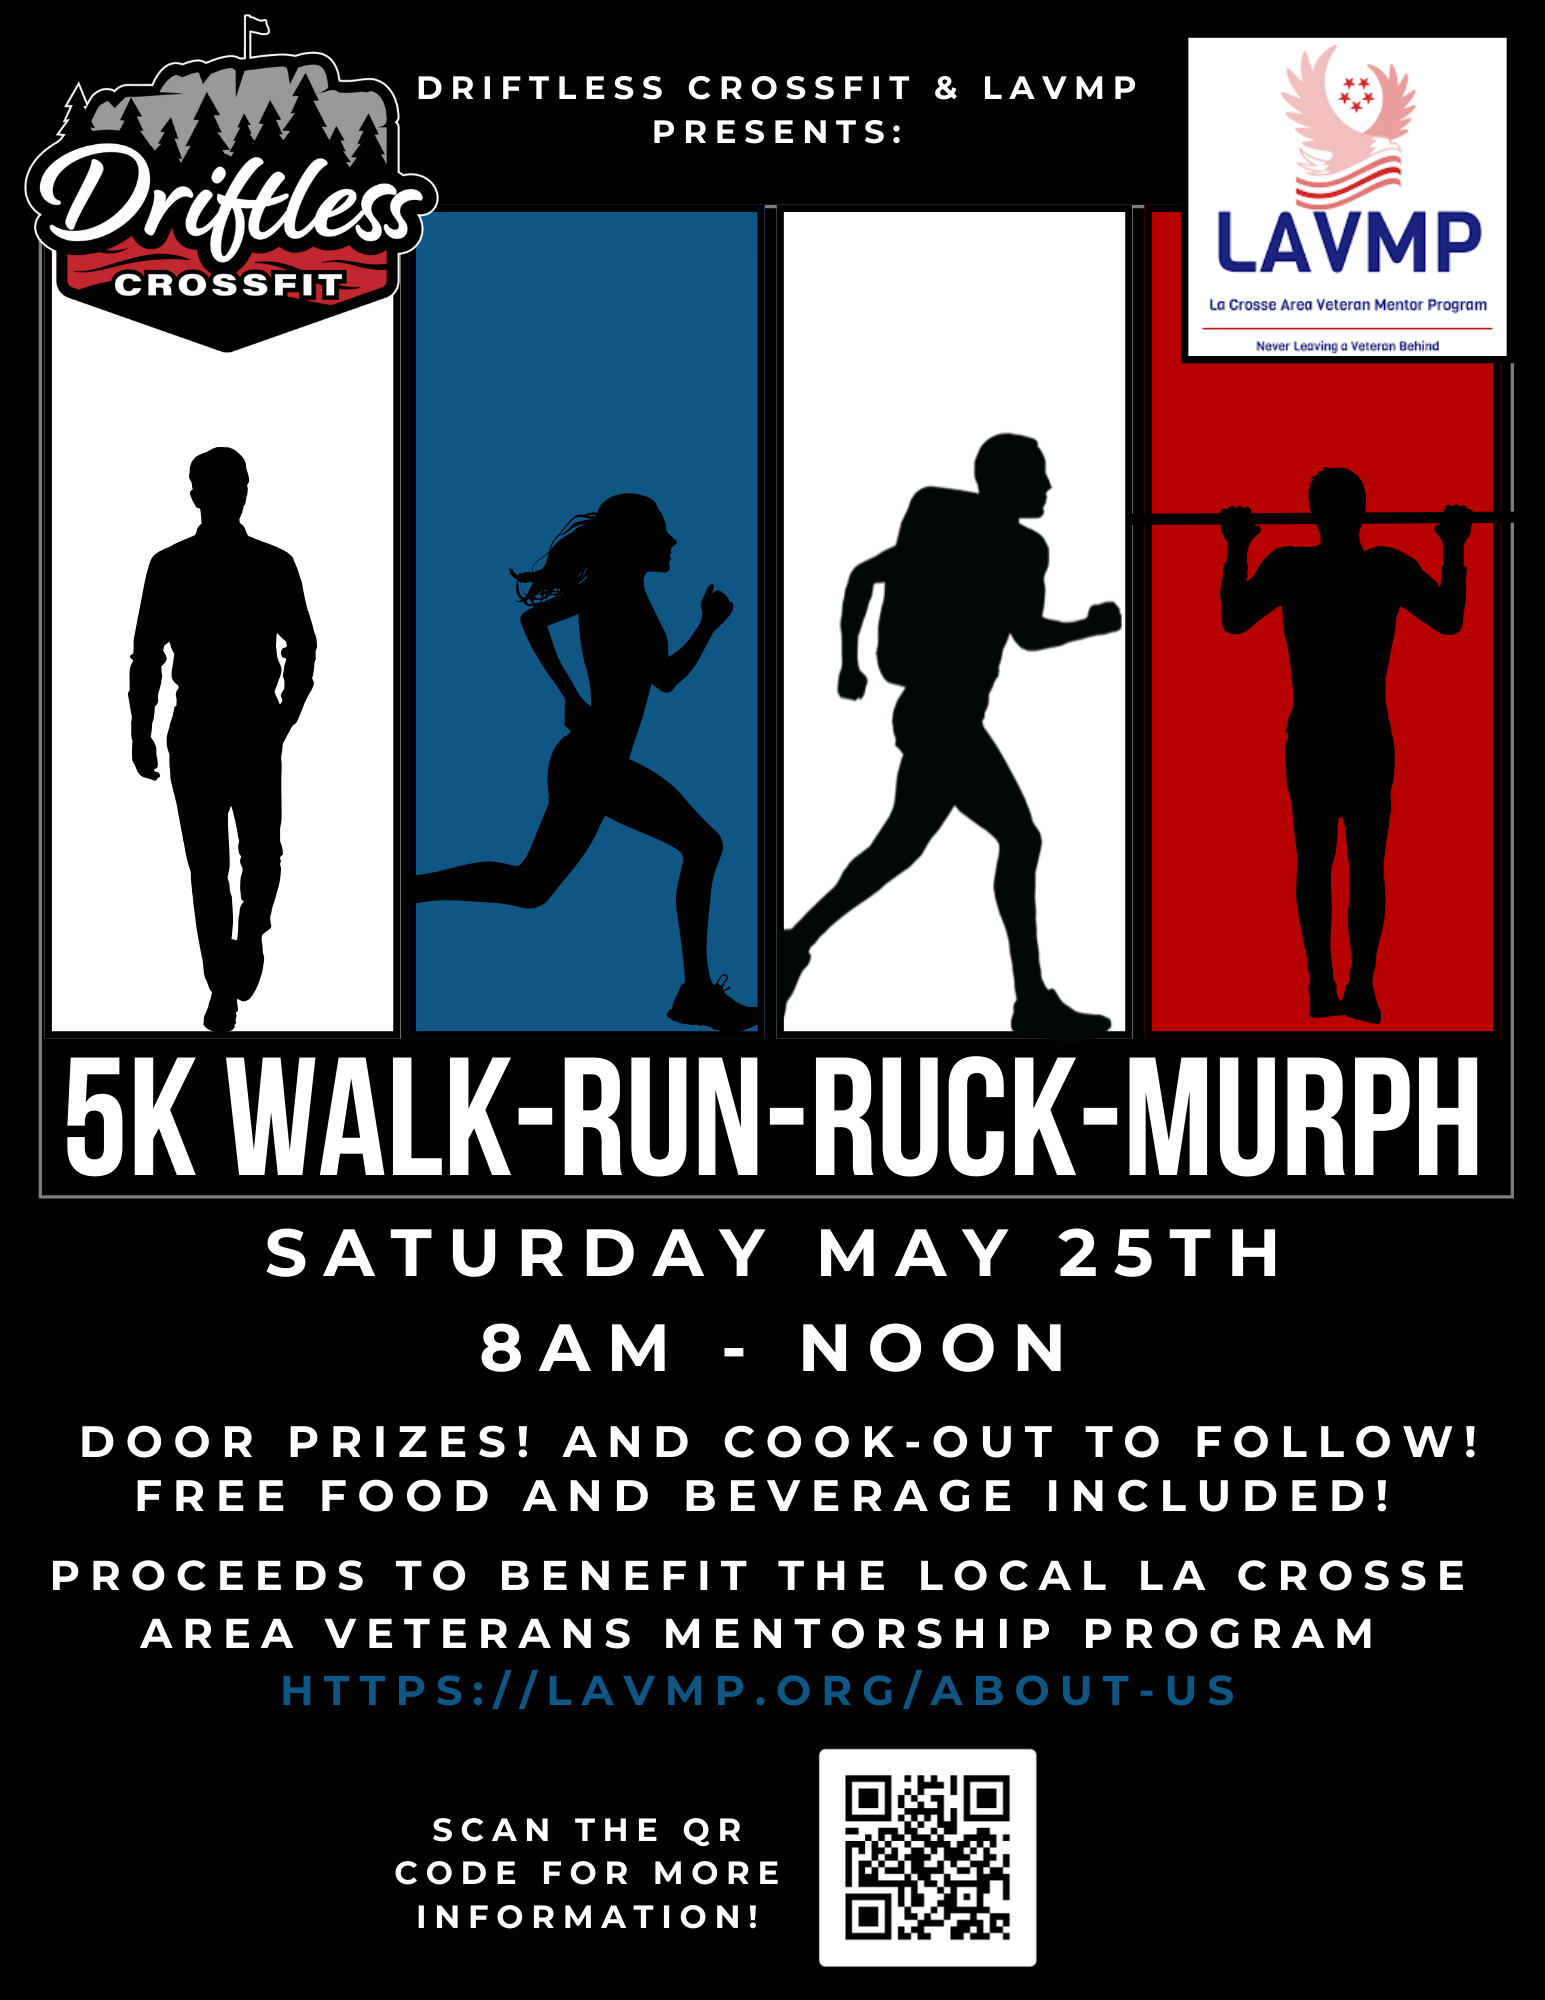 Door prizes and cook-out to follow. Free food and beverage included. Proceeds to benefit the local la crosse area veterans mentorship program. Learn more at lavmp.org/about-us